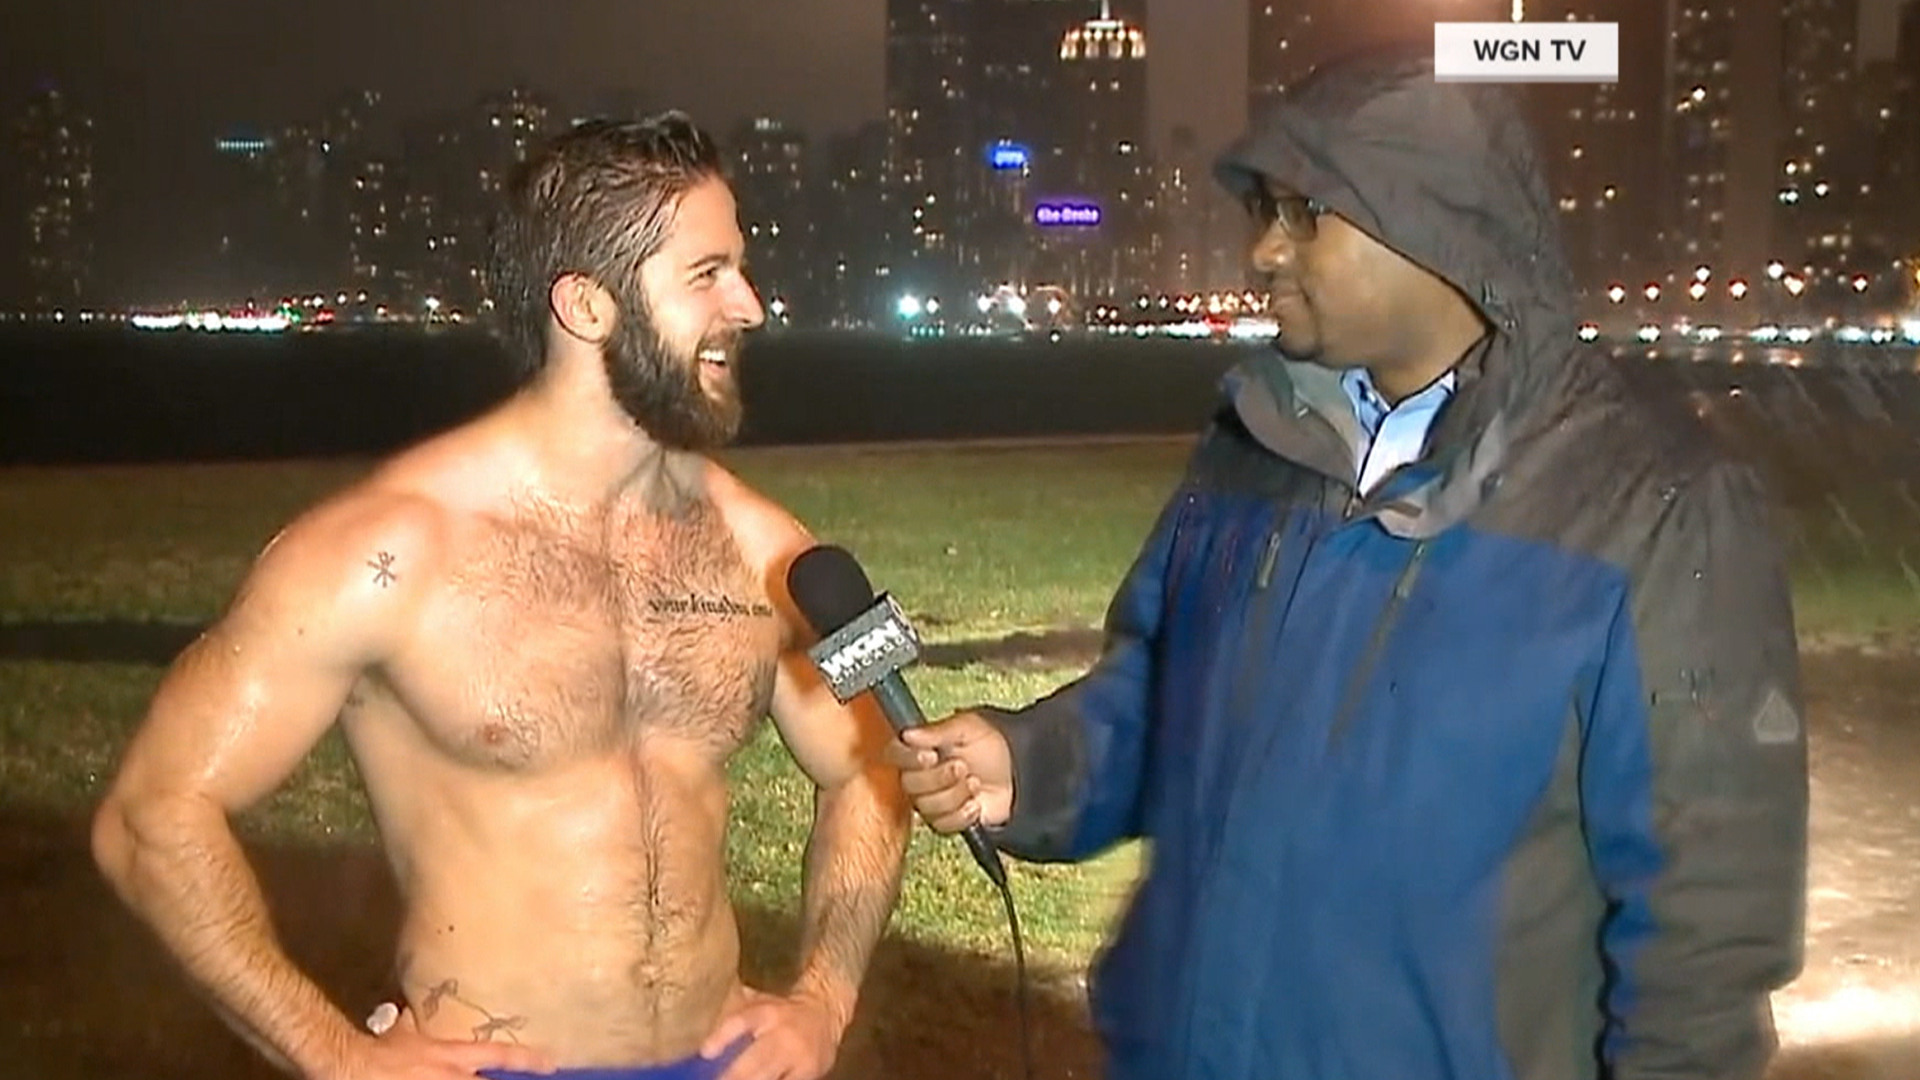 Guy running shirtless in Chicago announces he’s single, goes viral - NBC News1920 x 1080